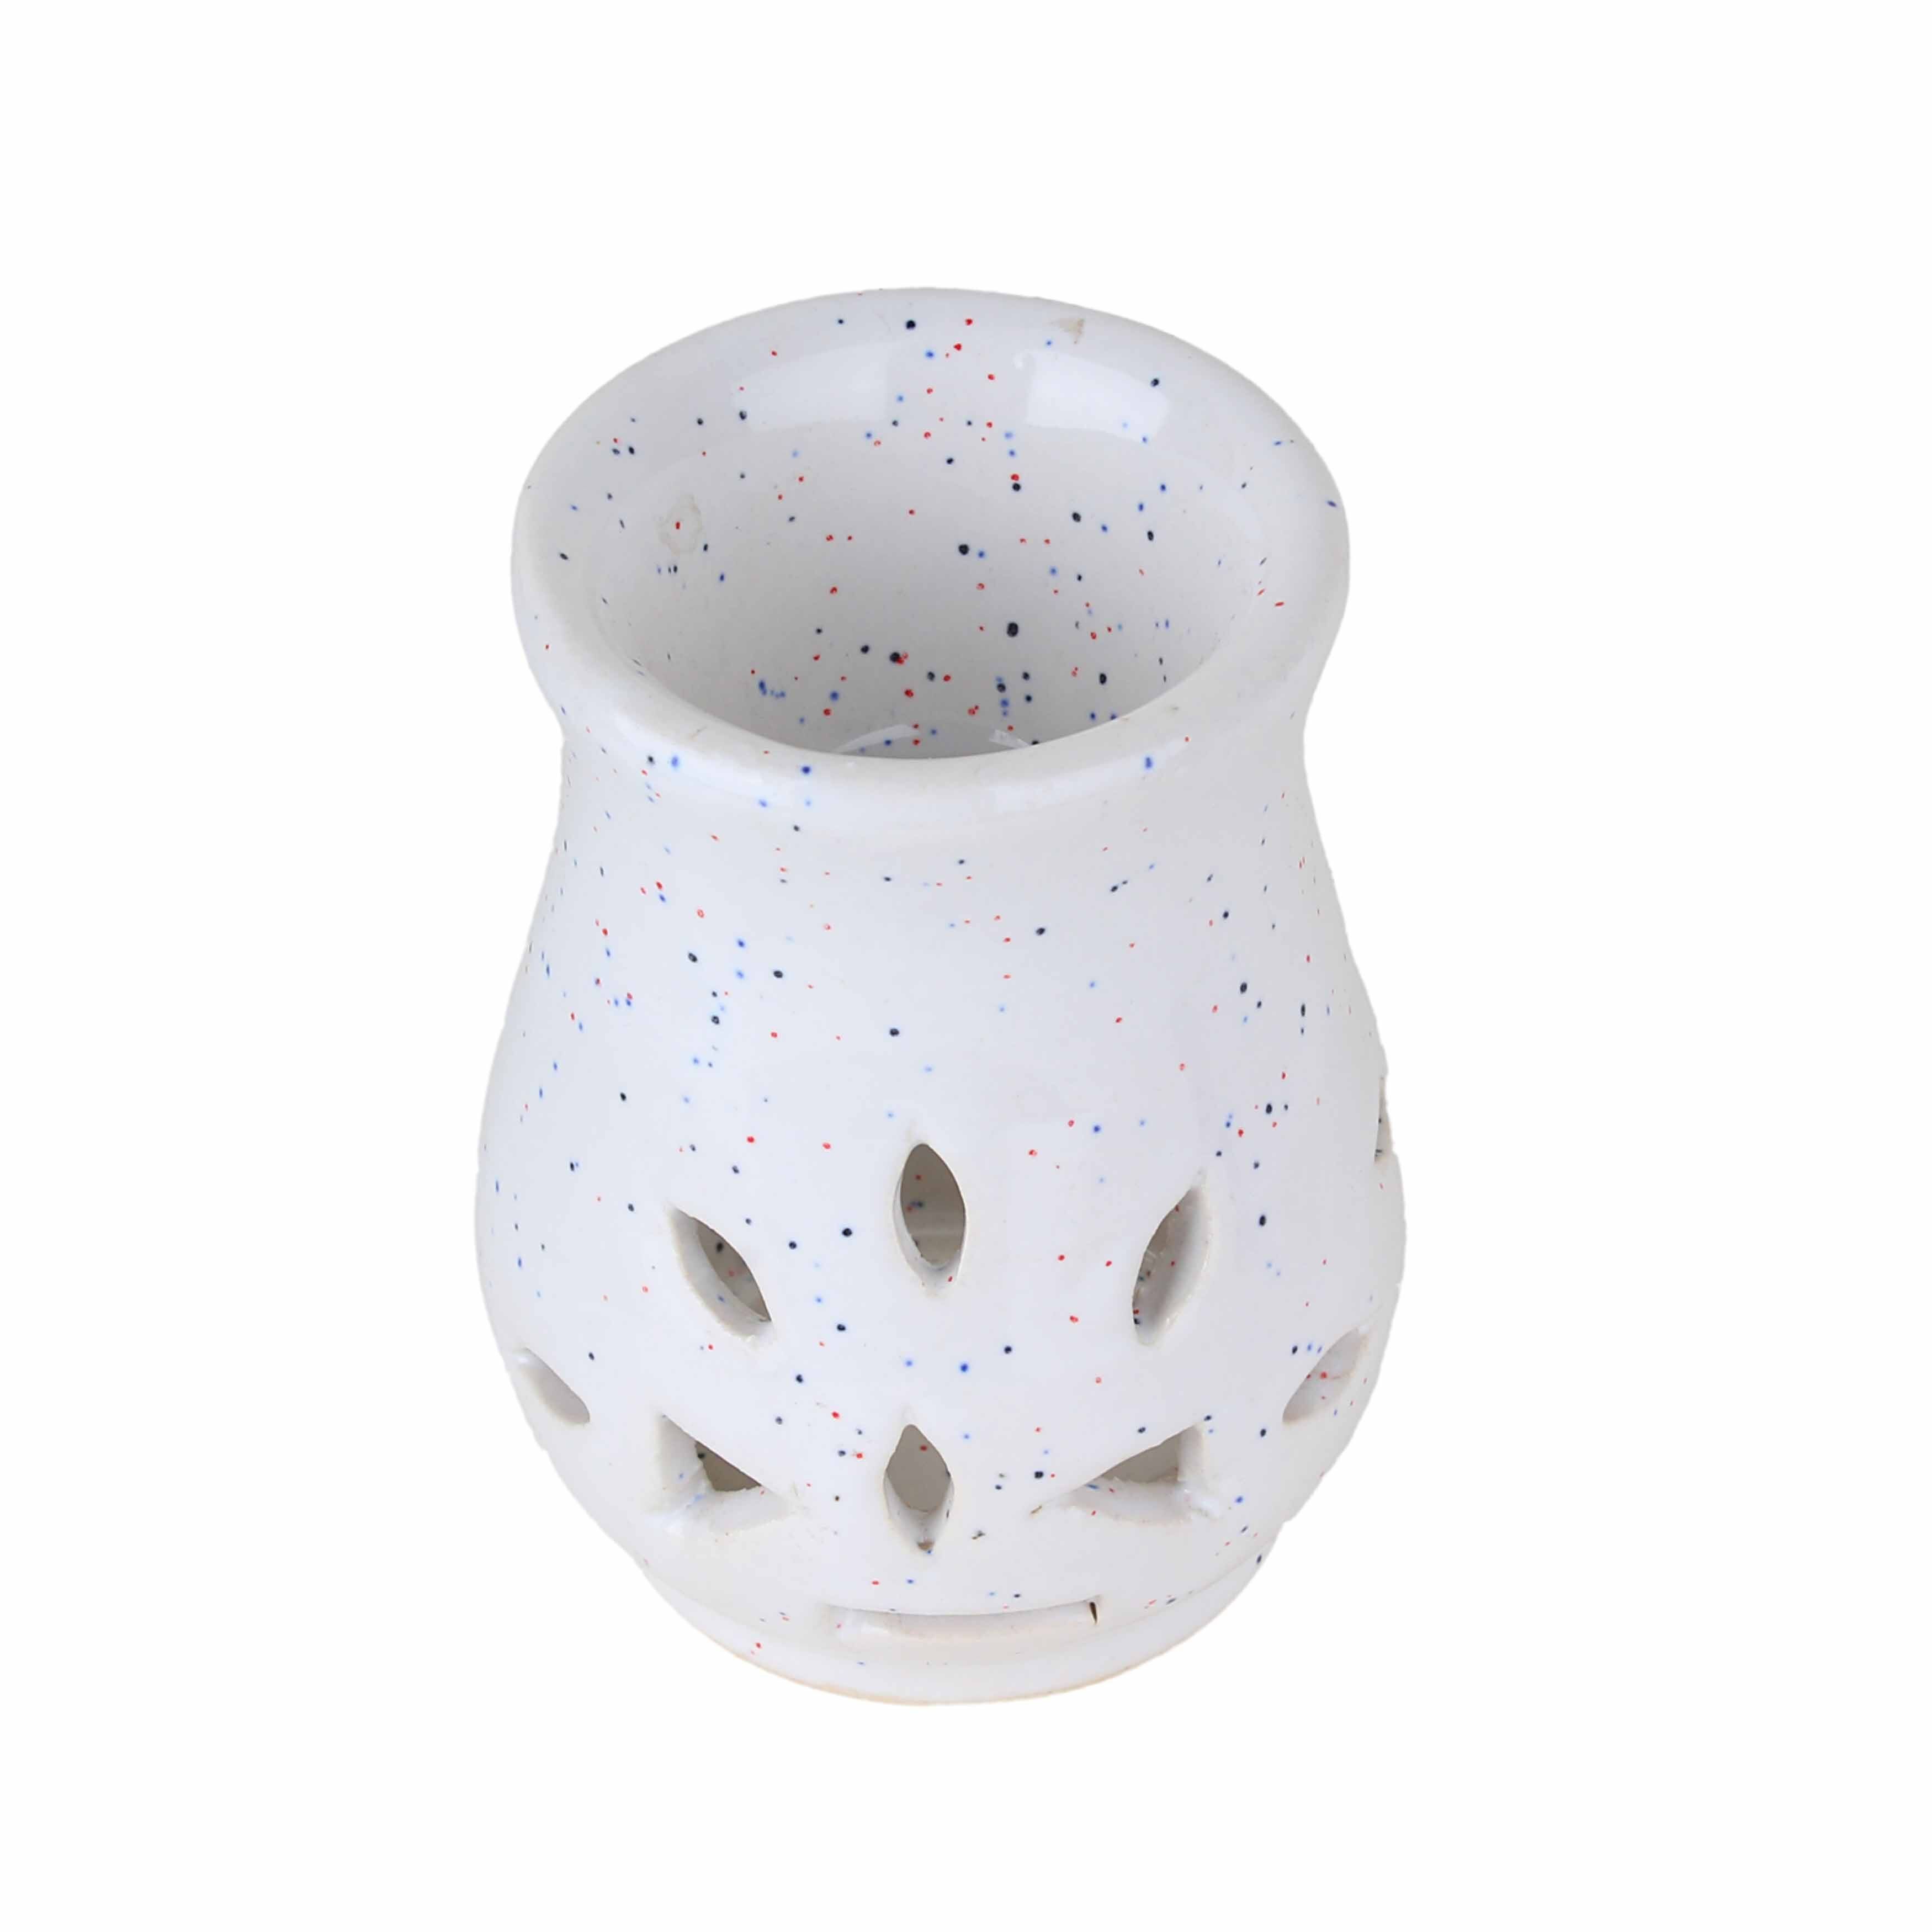 Asian Aura Ceramic Aromatic Oil Diffuser with 2 oil bottles AA-CB-0031W